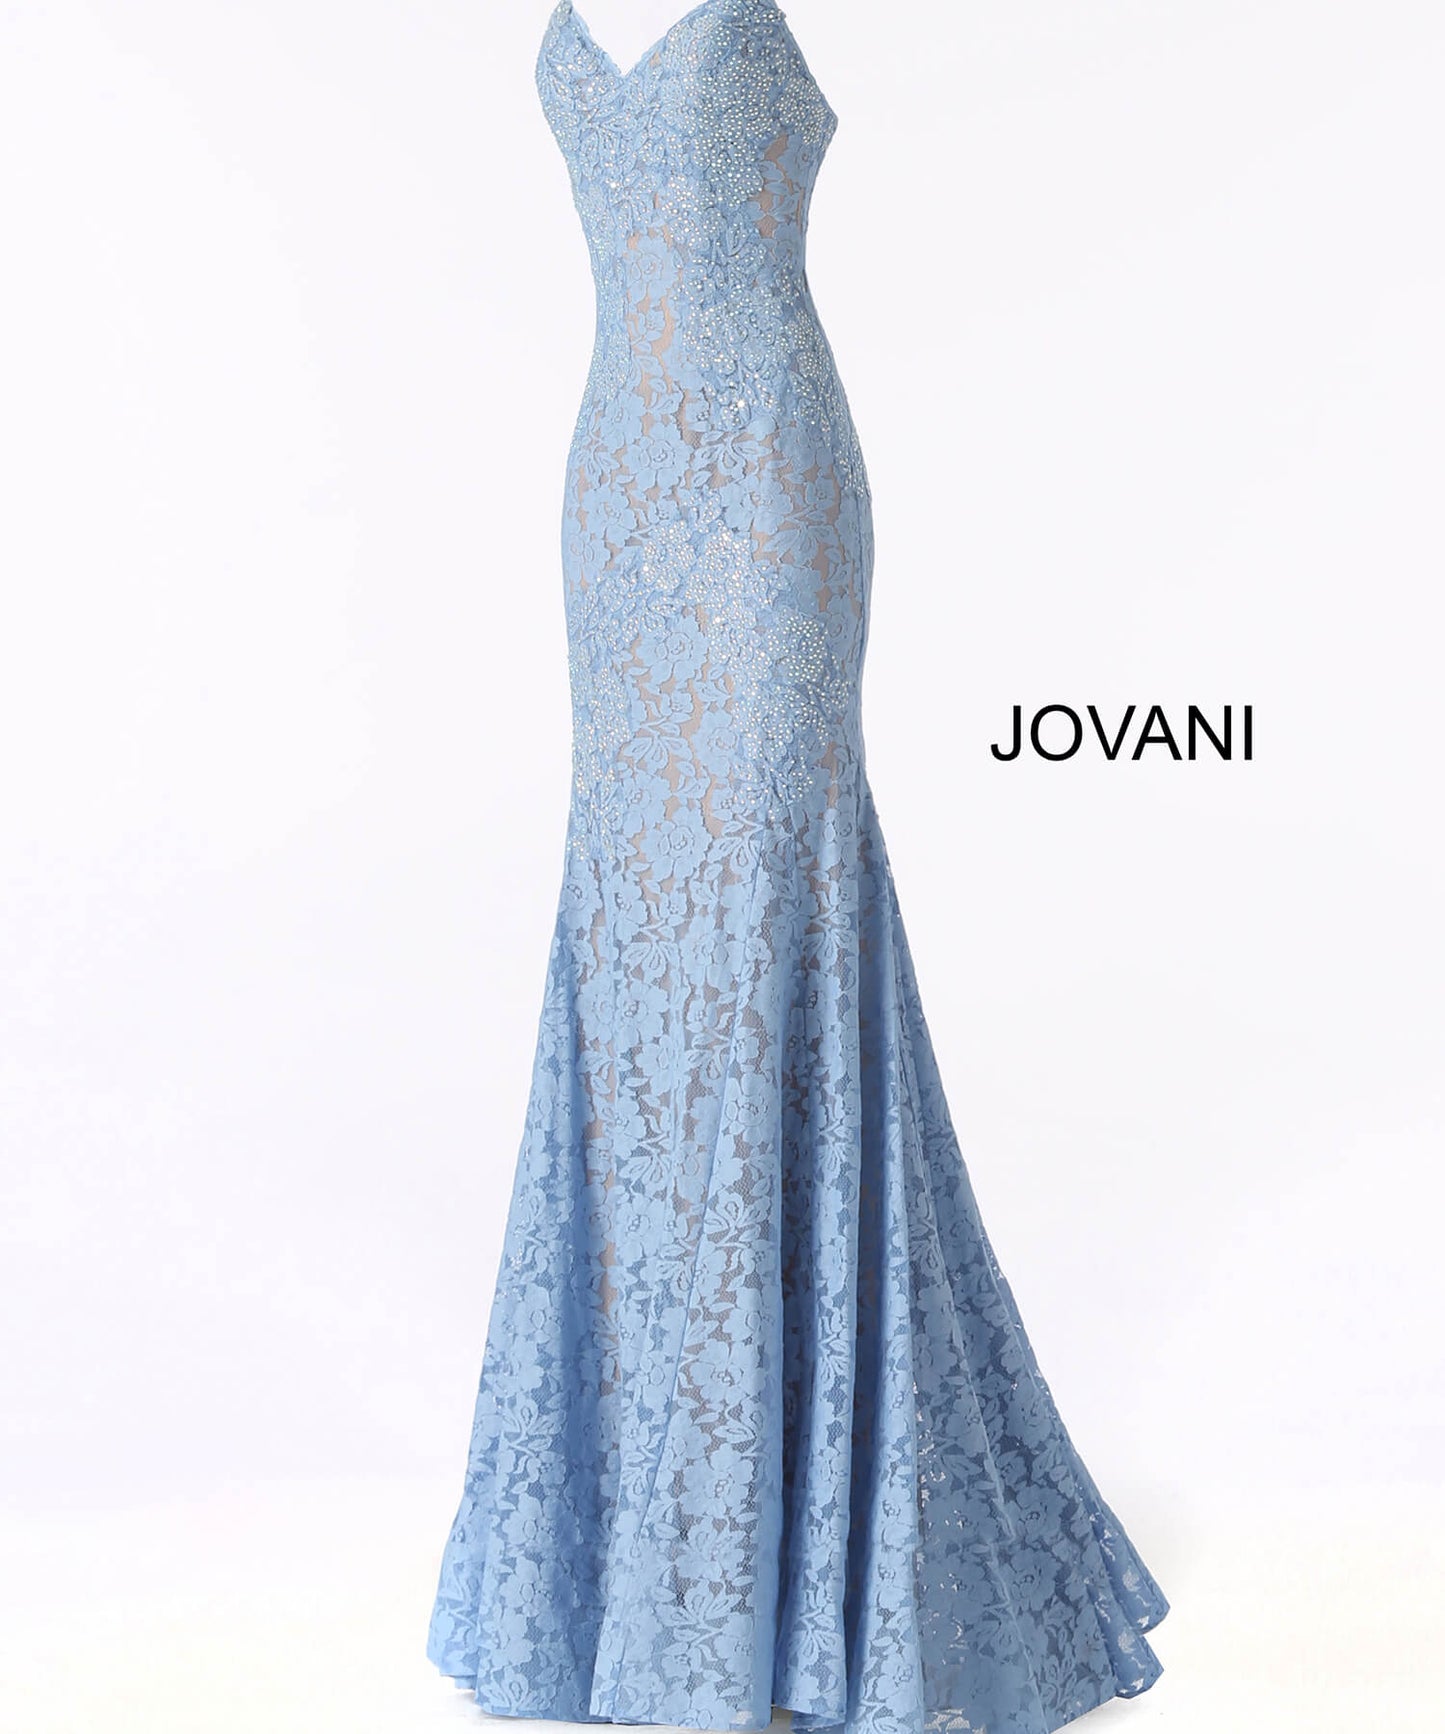 Jovani 37334 strapless embellished lace prom dress Fitted Mermaid Long peak point neckline